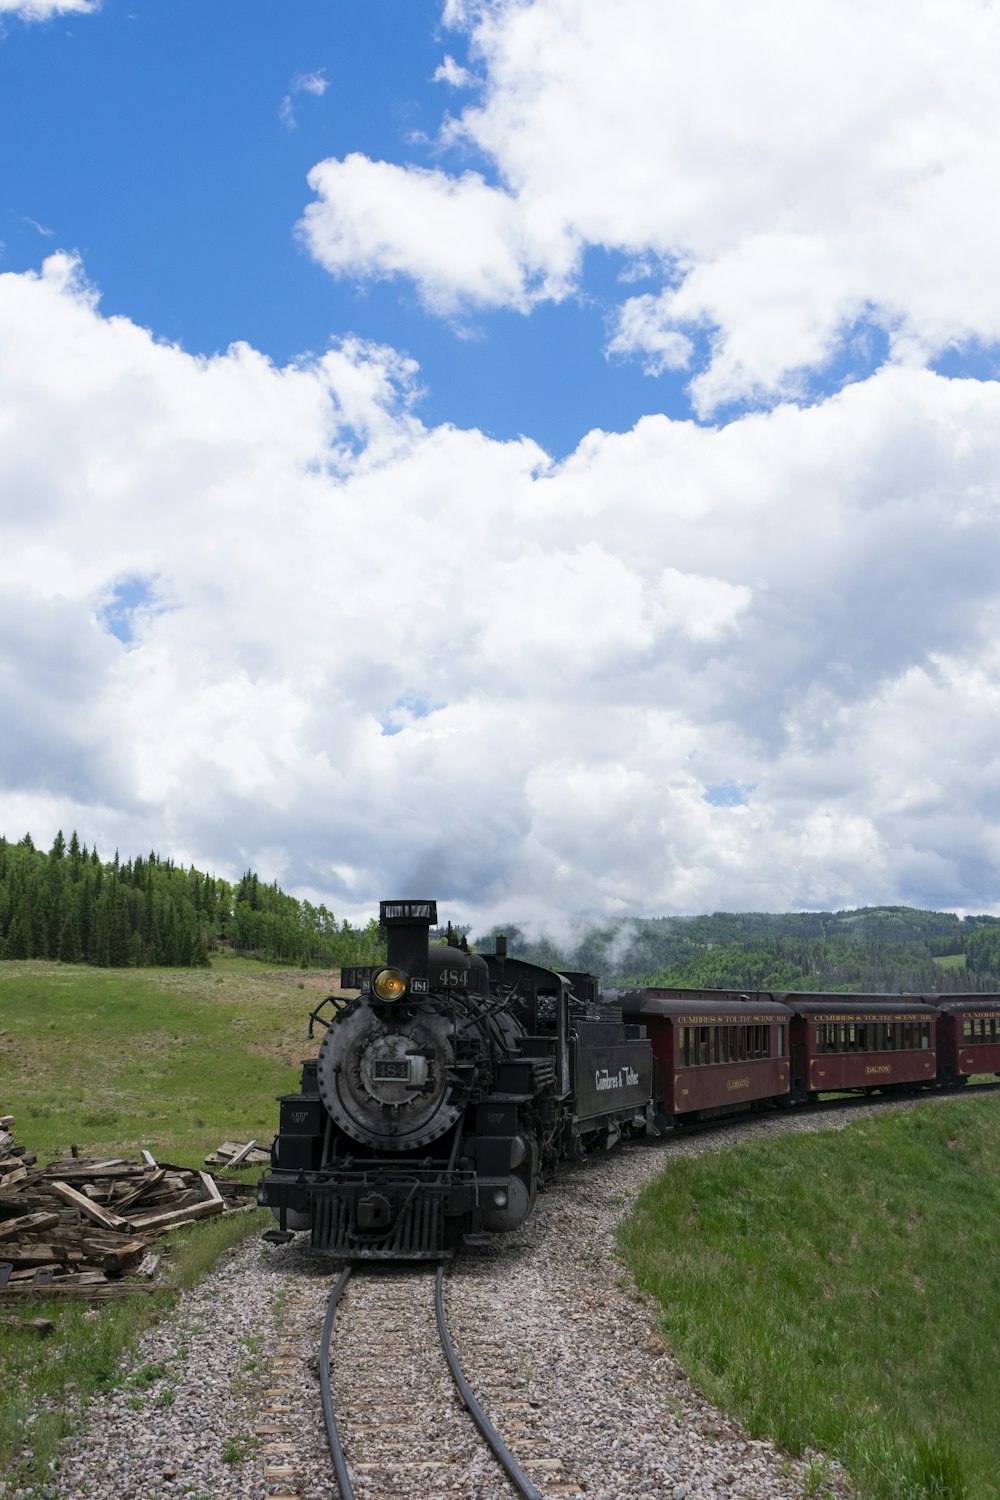 black and red train on rail under white clouds and blue sky during daytime